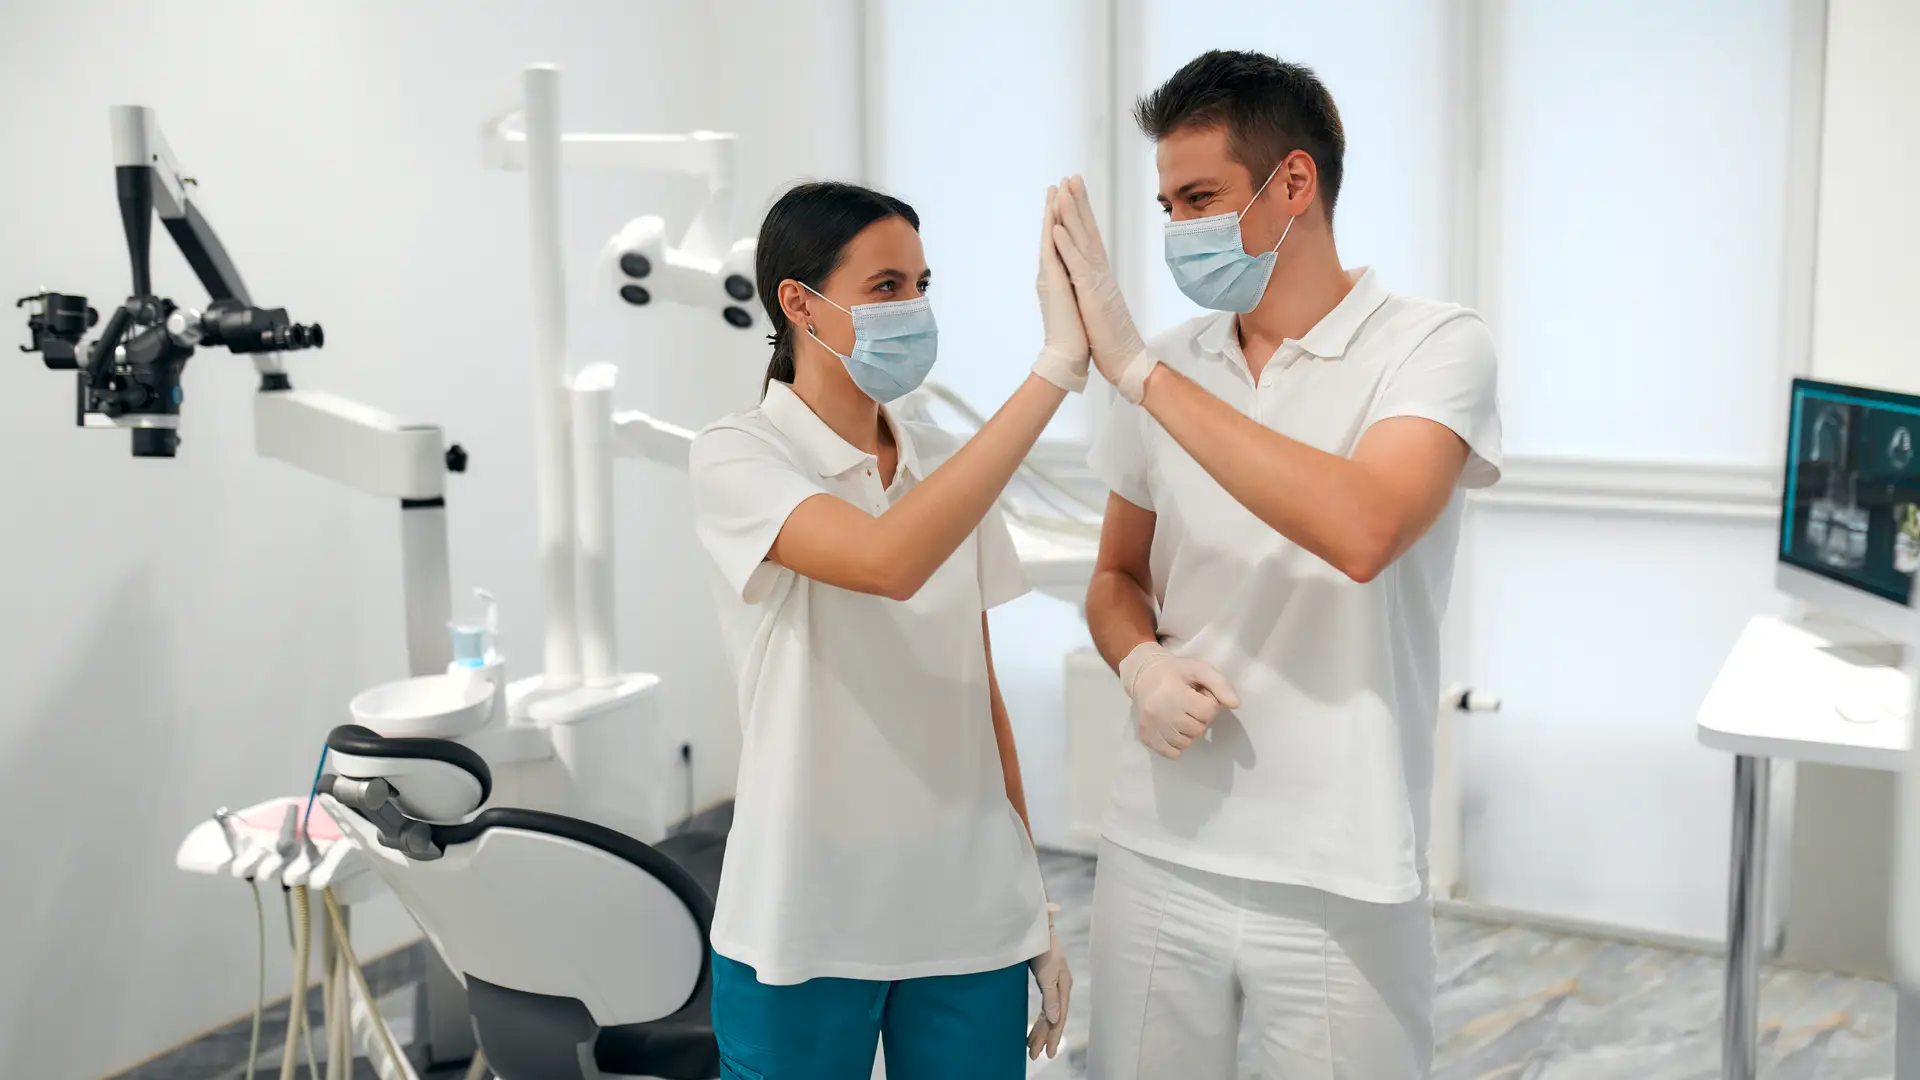 Dentist and patient high fiving at dental office. 